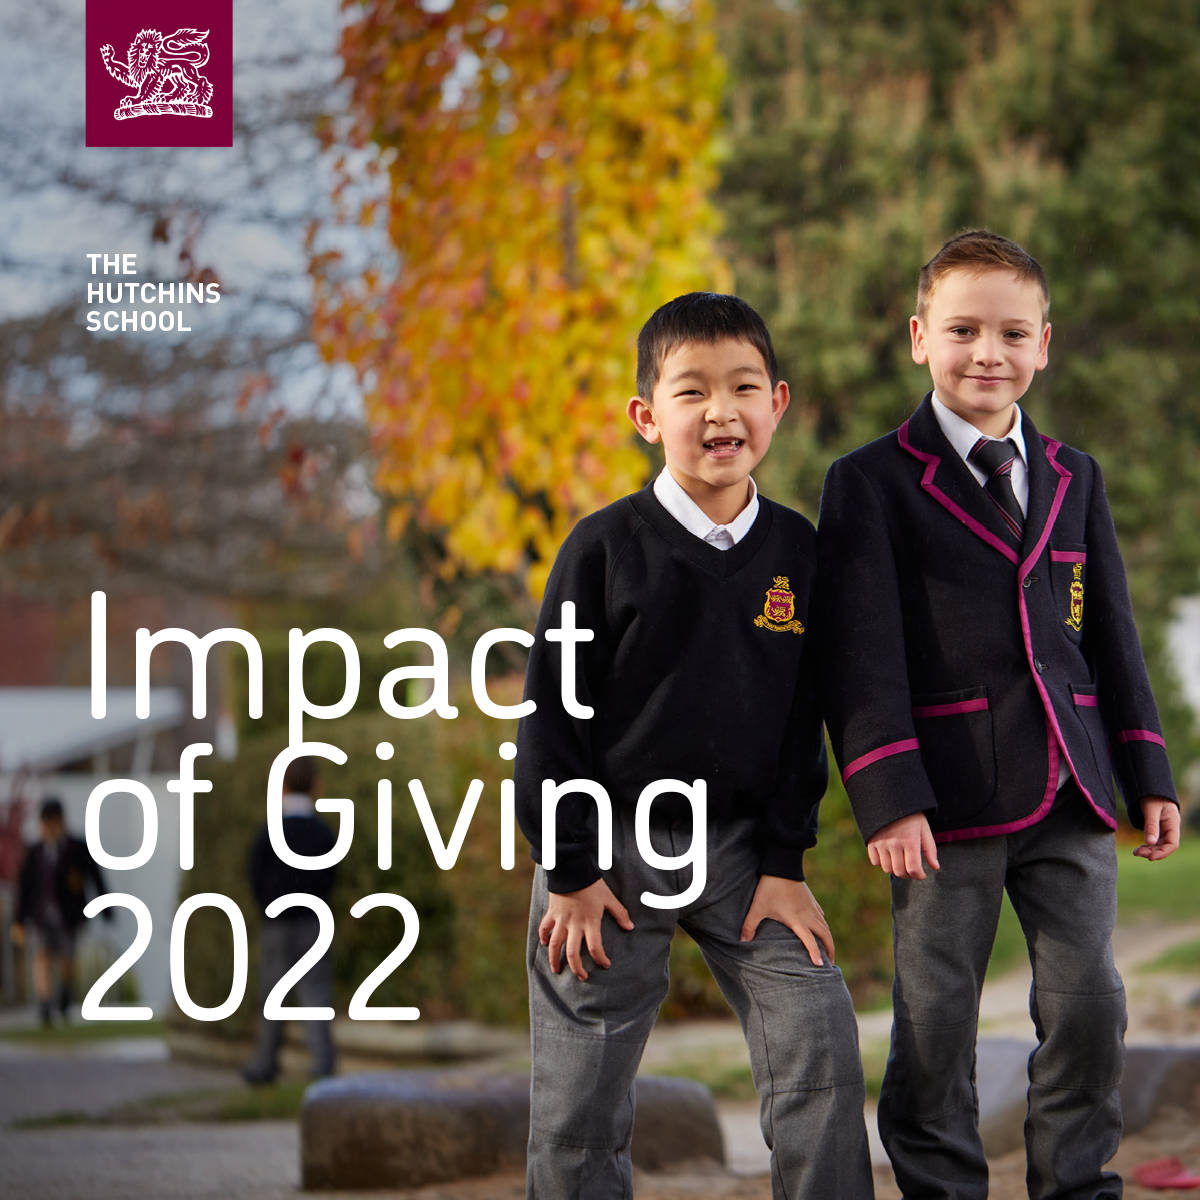 The Hutchins School Impact of Giving 2022